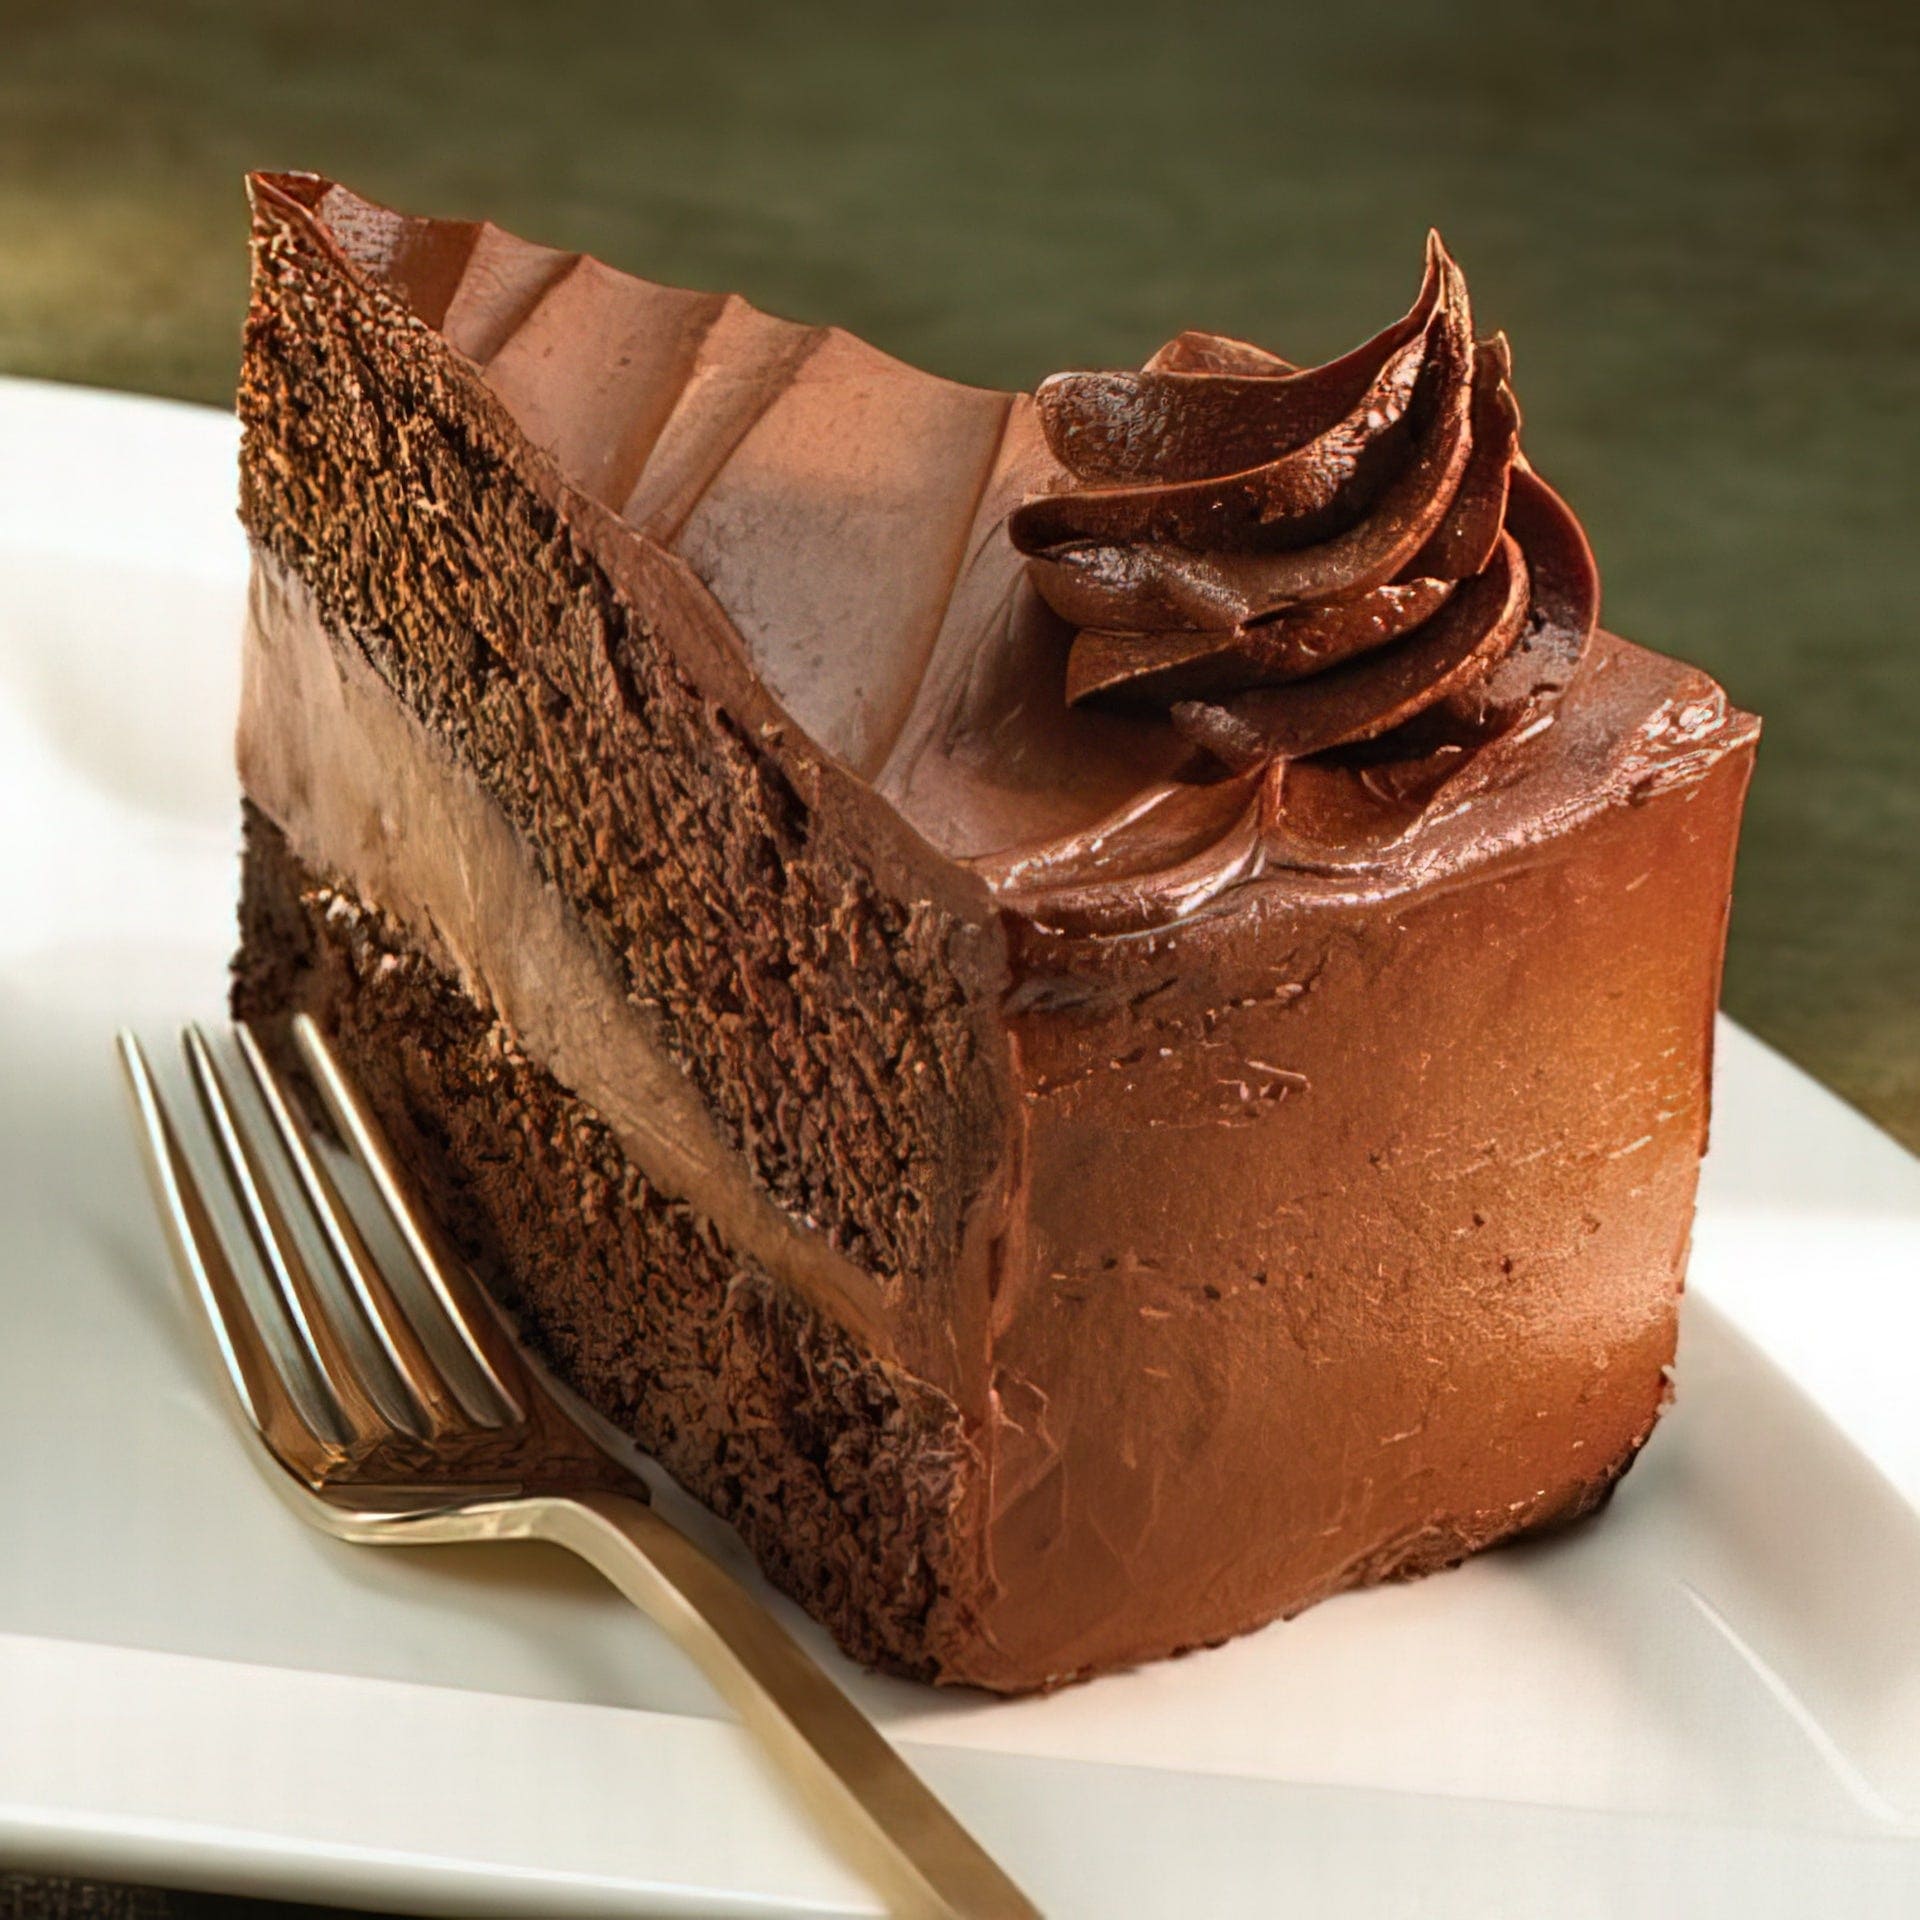 Commercial HERSHEY'S Blackout Cake